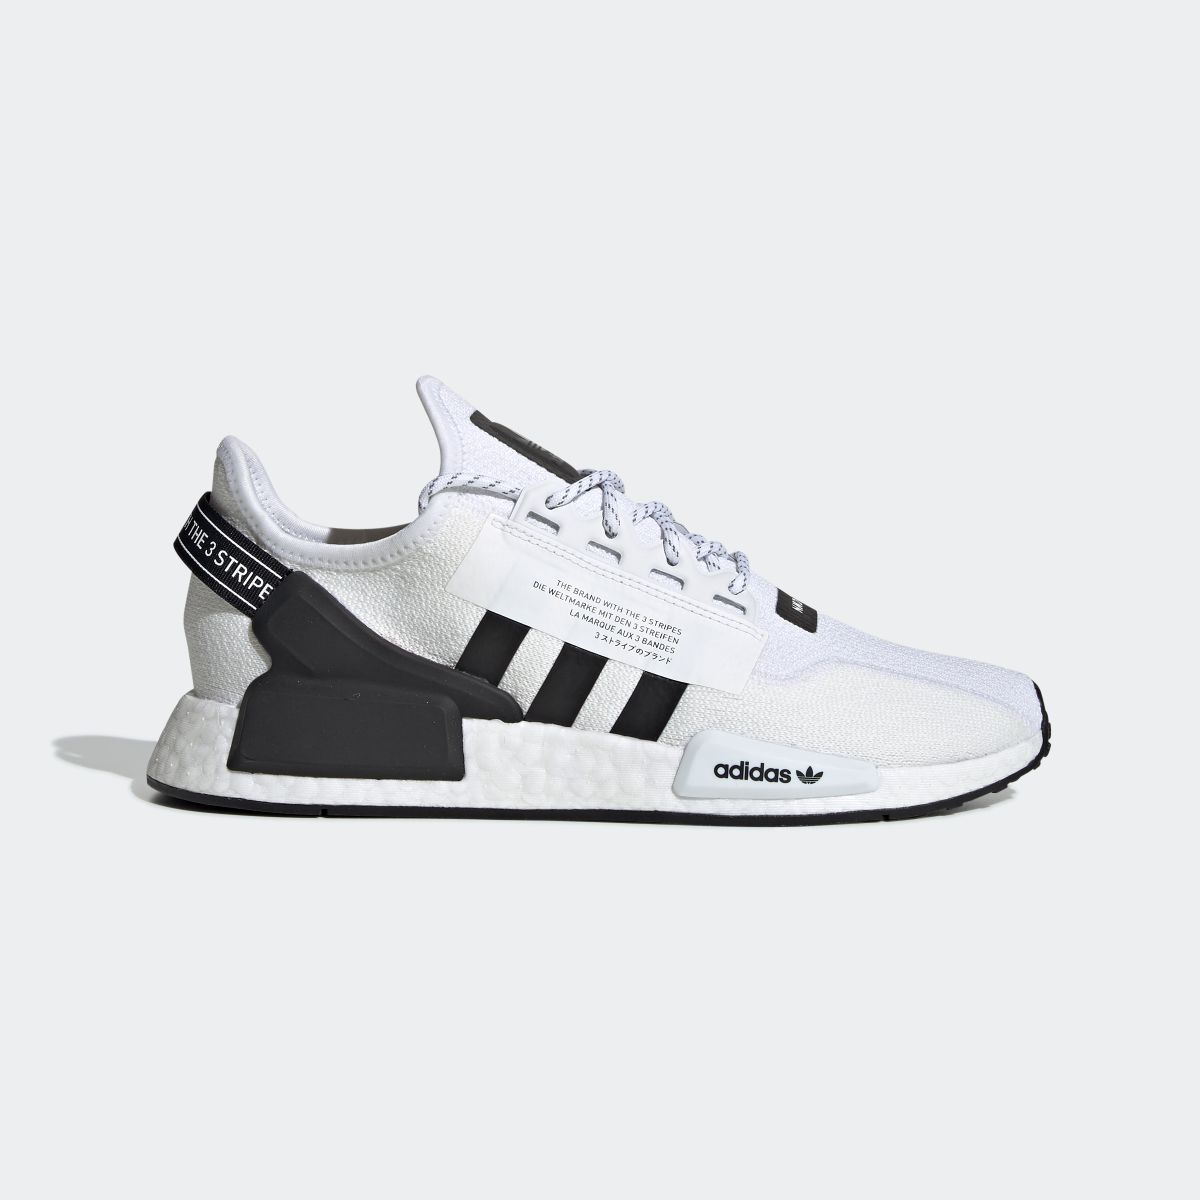 Adidas nmd r1 shoes core black carbon trace scarlet eBay